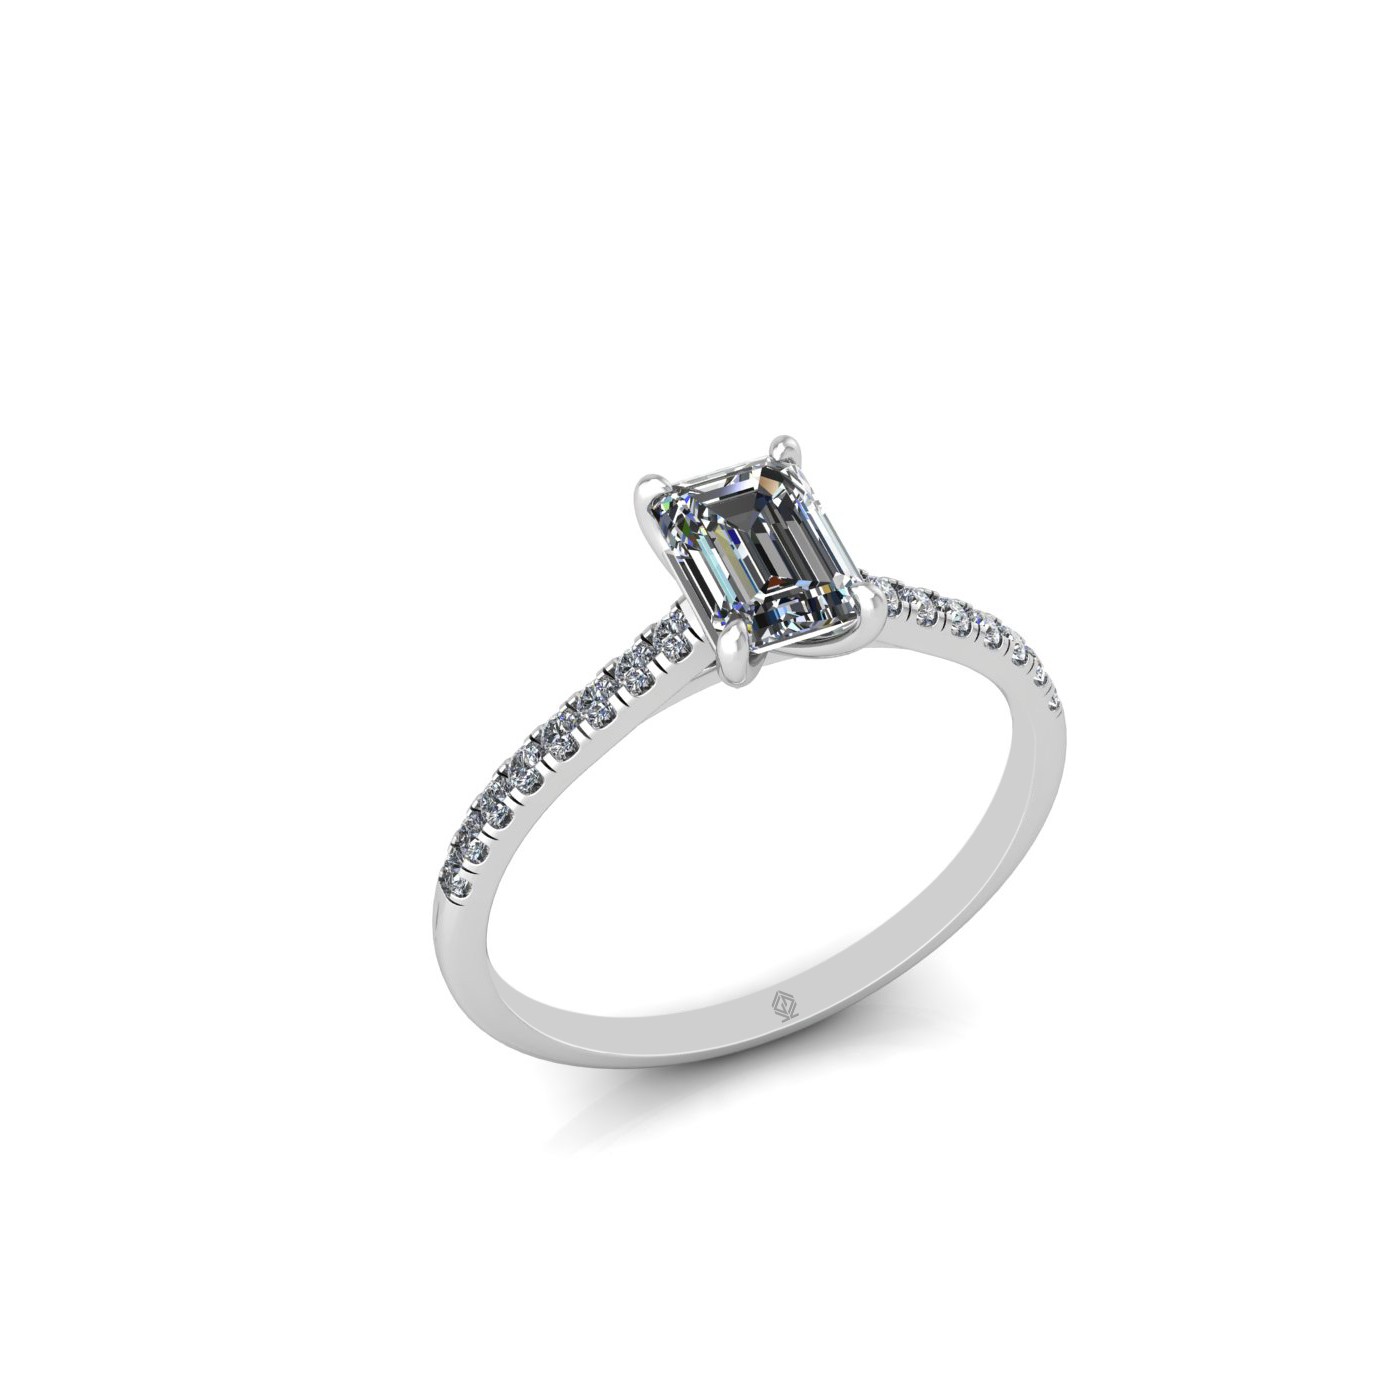 18k white gold  0,80 ct 4 prongs emerald cut diamond engagement ring with whisper thin pavÉ set band